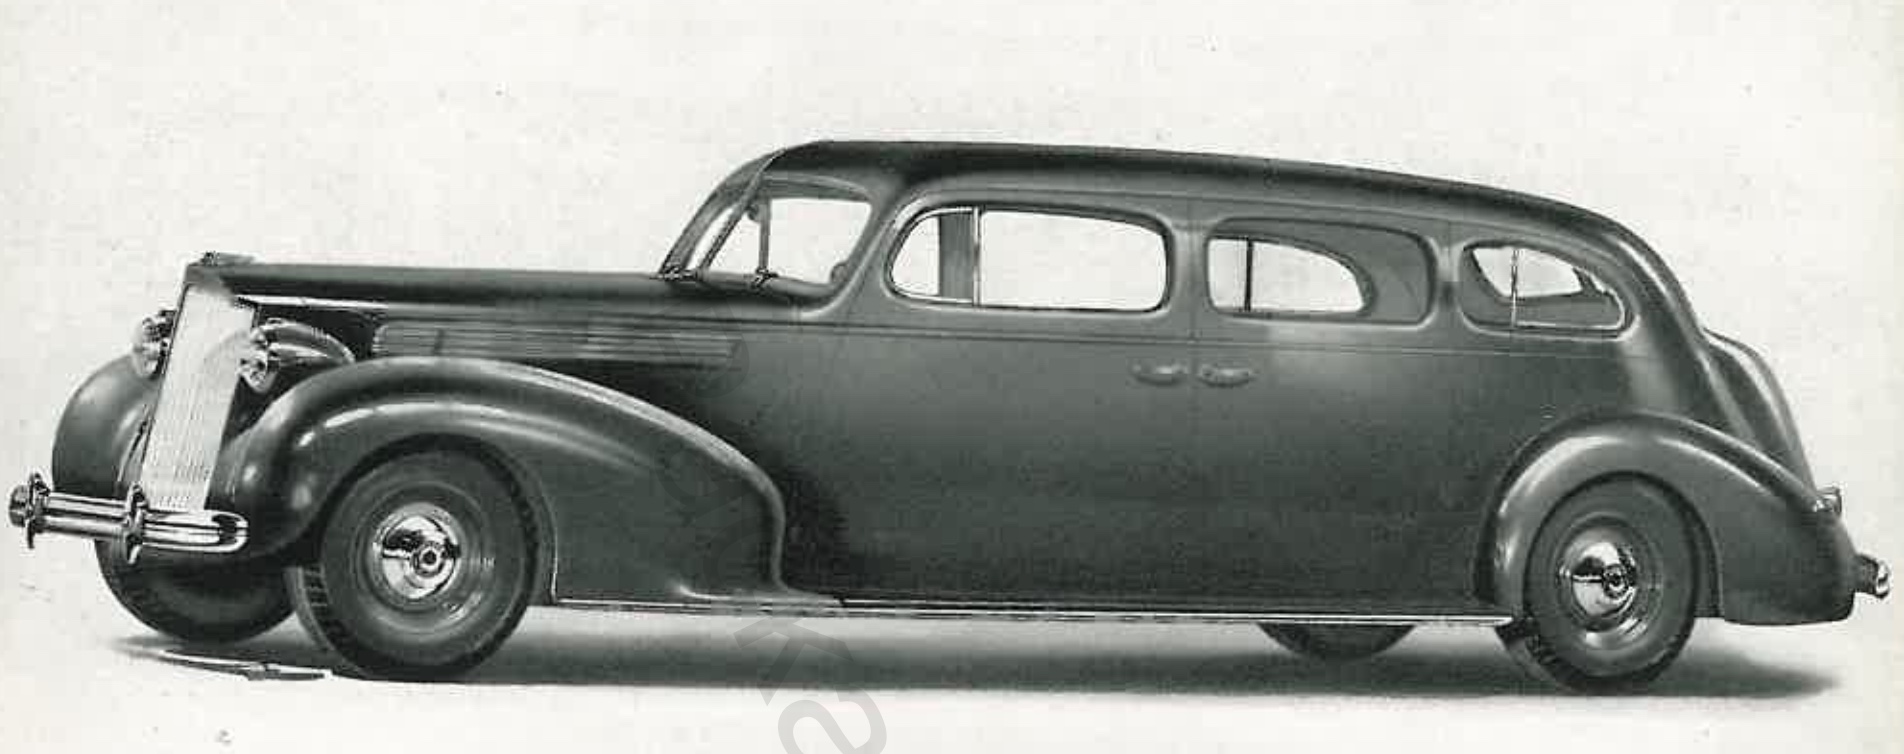 1938 16th 1190 Eight Touring Limo